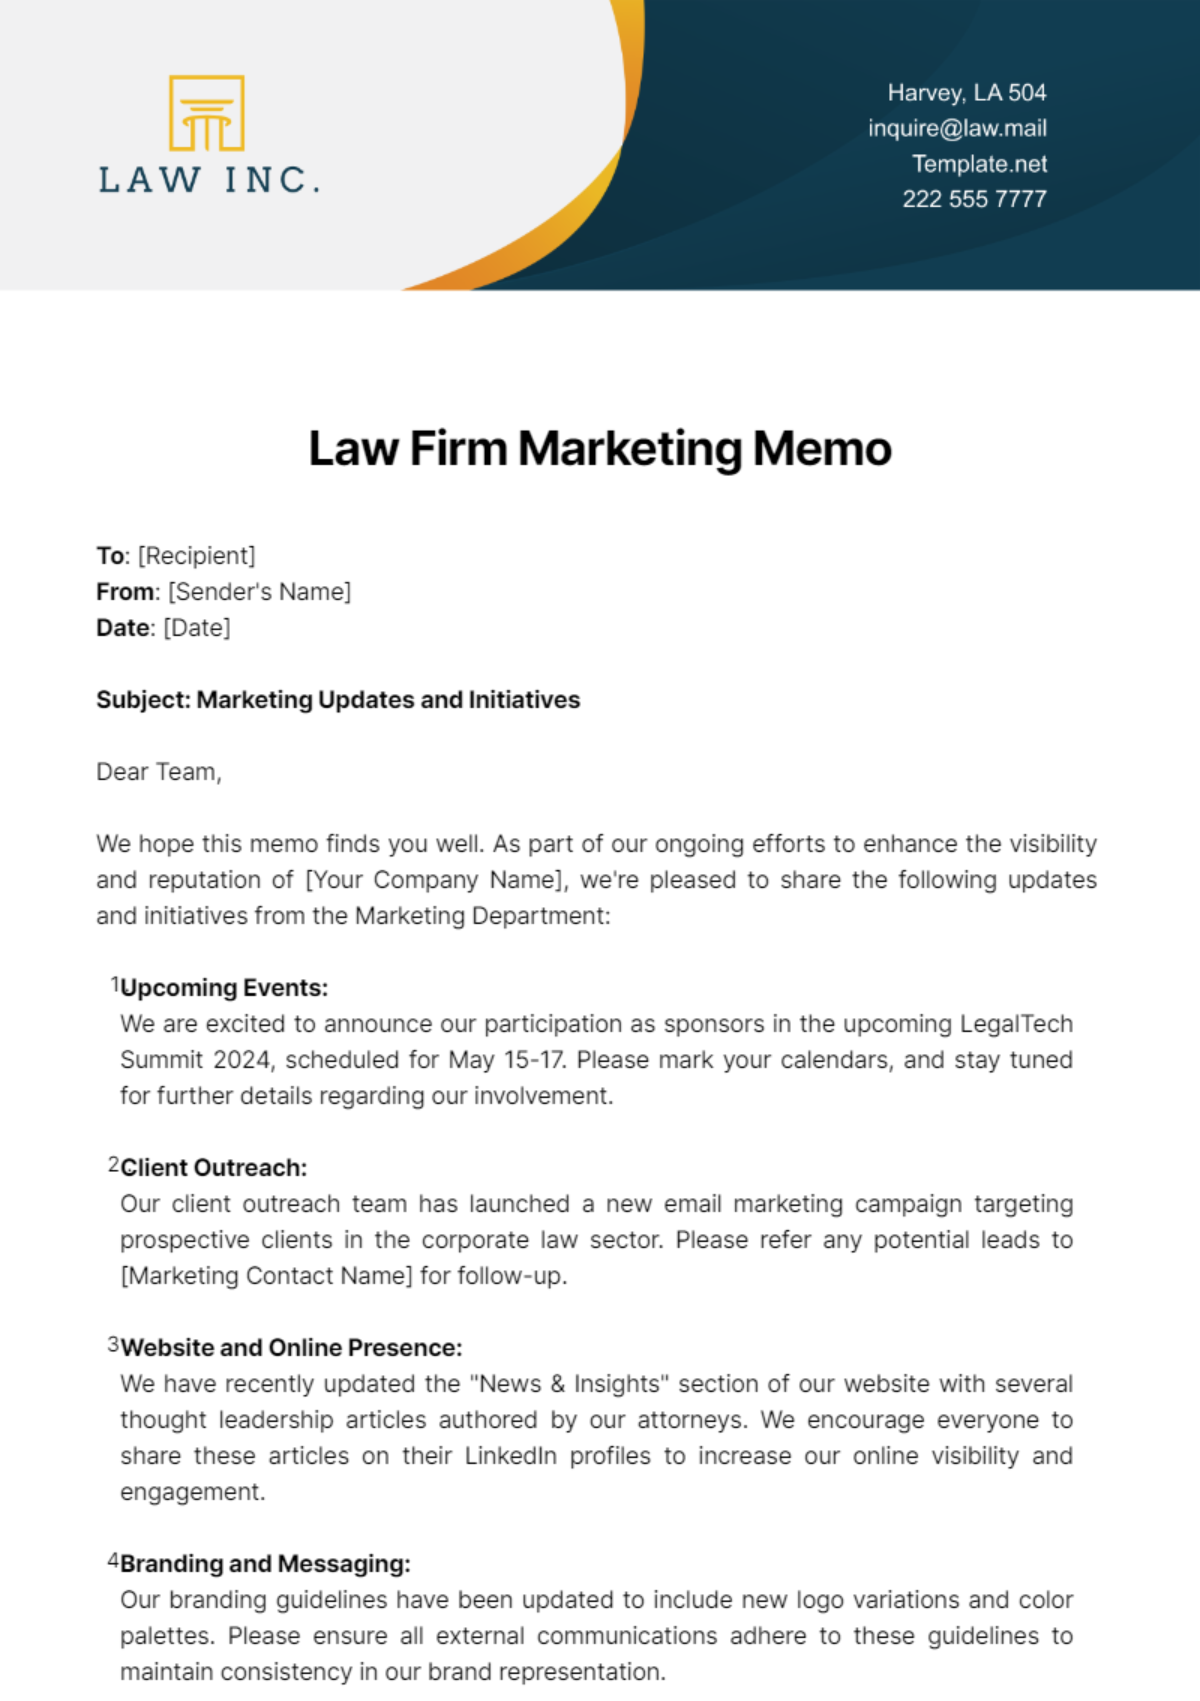 Free Law Firm Marketing Memo Template